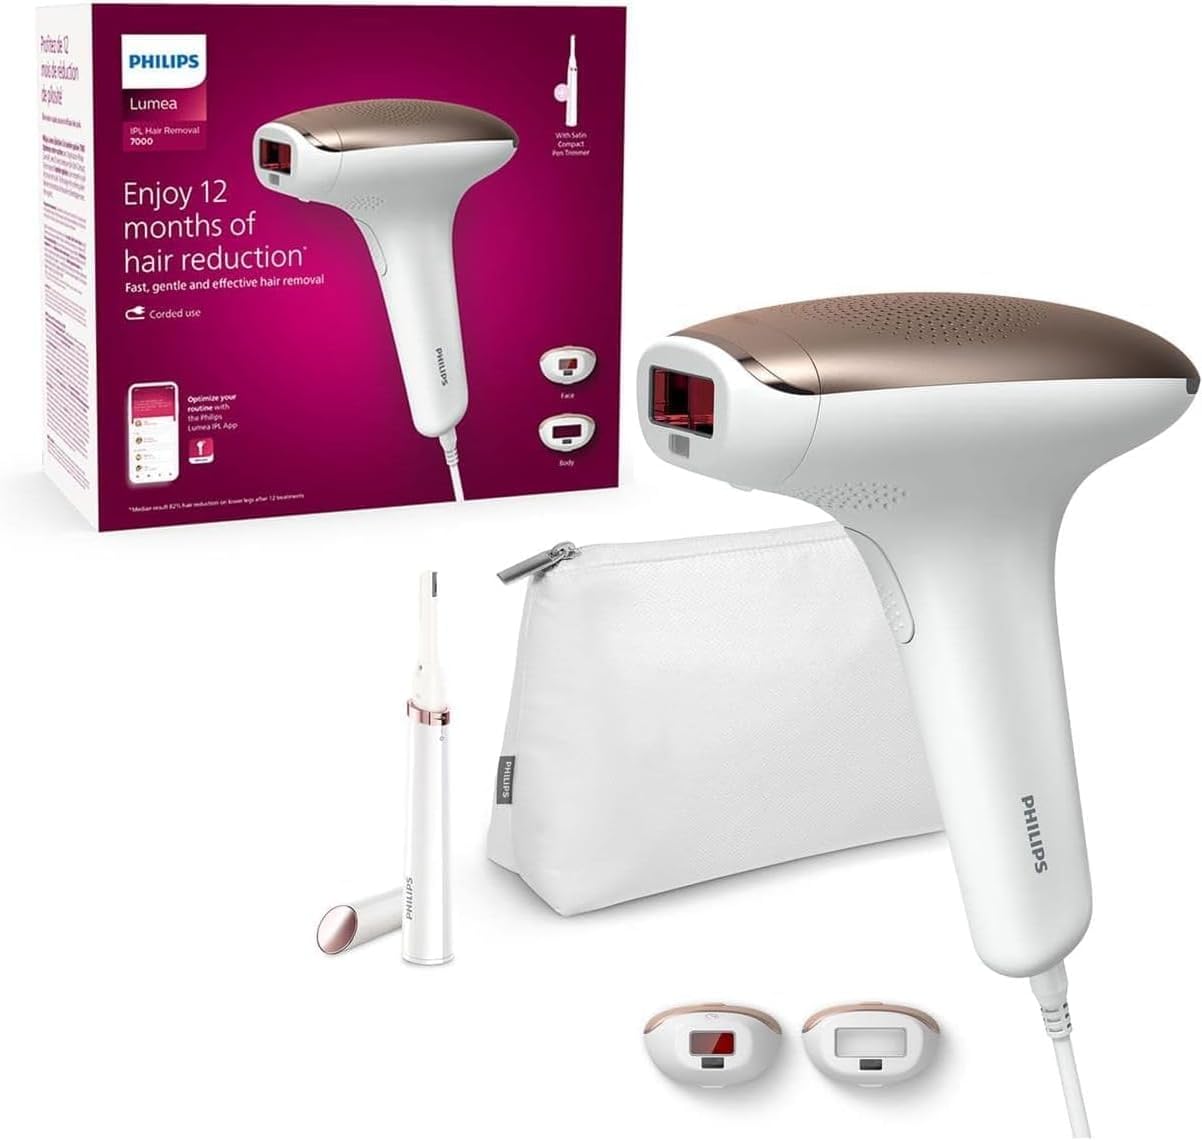 Philips Lumea IPL Hair Removal Advance - Hair Removal Device with Satin Compact Pen Trimmer, 2 Attachments for Body and Face, Corded Use (Model BRI921/00)